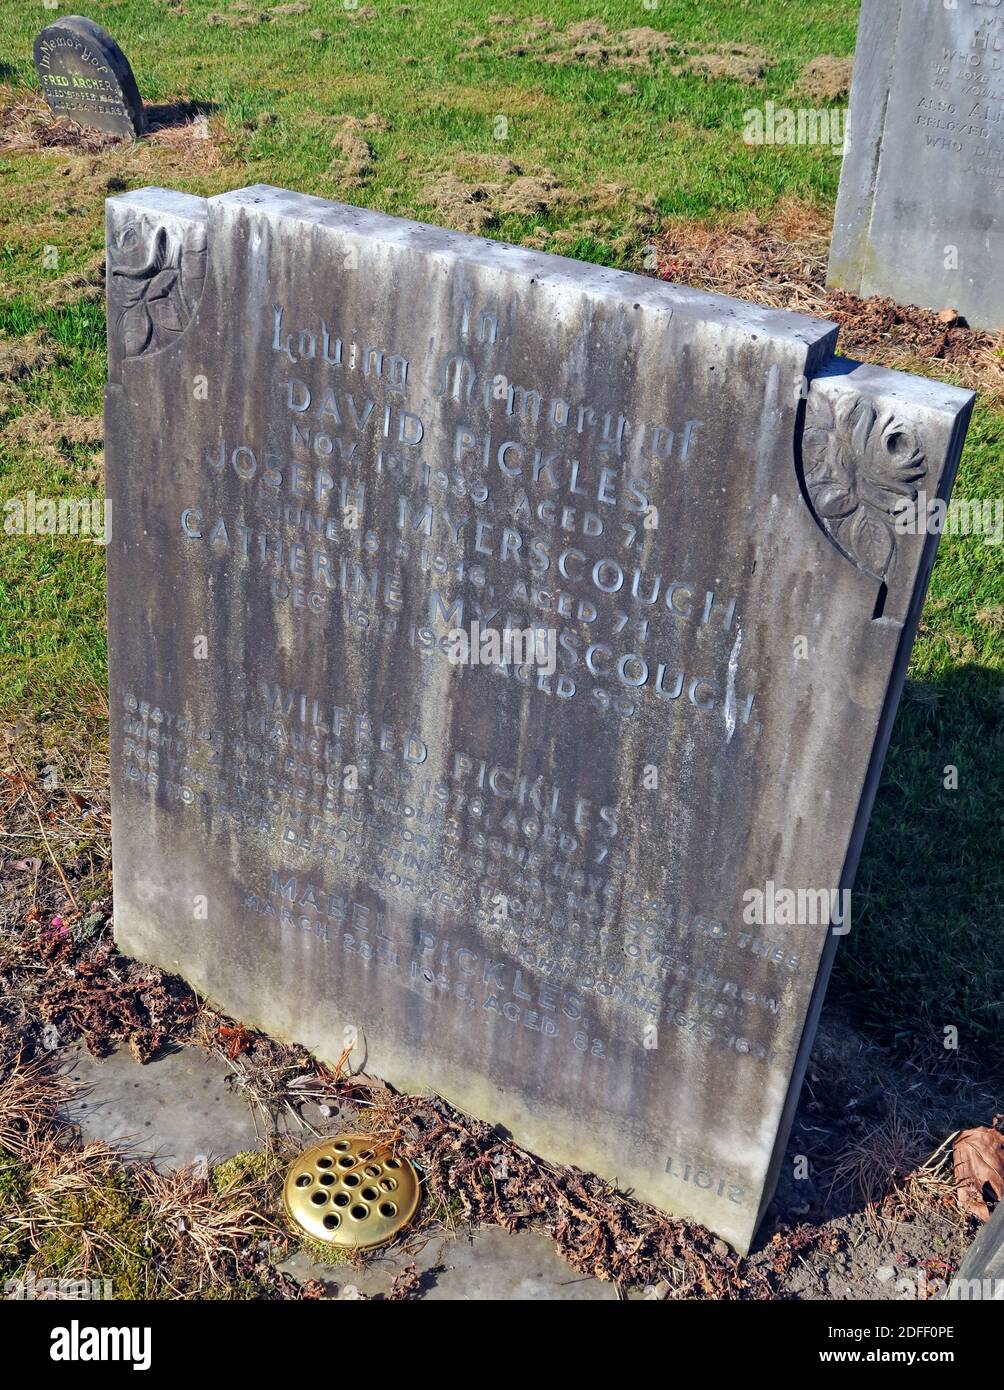 Wilfred Pickles, presentatore radio, Mabel Pickles grave, Southern Cemetery, Barlow Moor Road, Manchester, North West England, UK, M21 Foto Stock